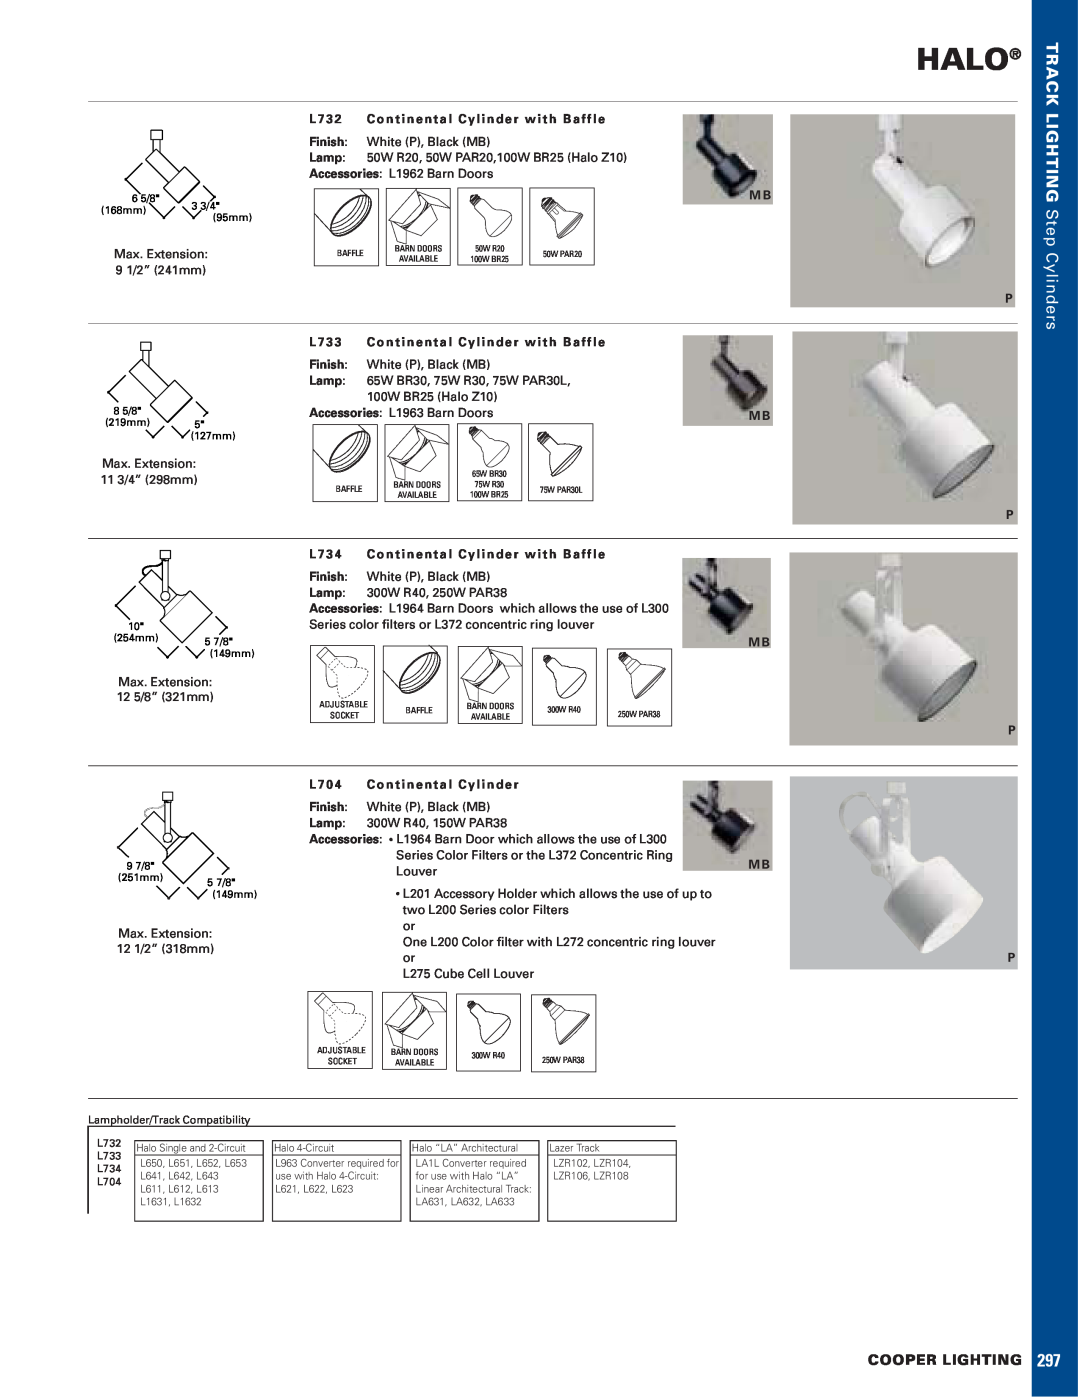 Halo Lighting System A225 manual Halo, TRACK LIGHTING Step Cylinders, Cooper Lighting 